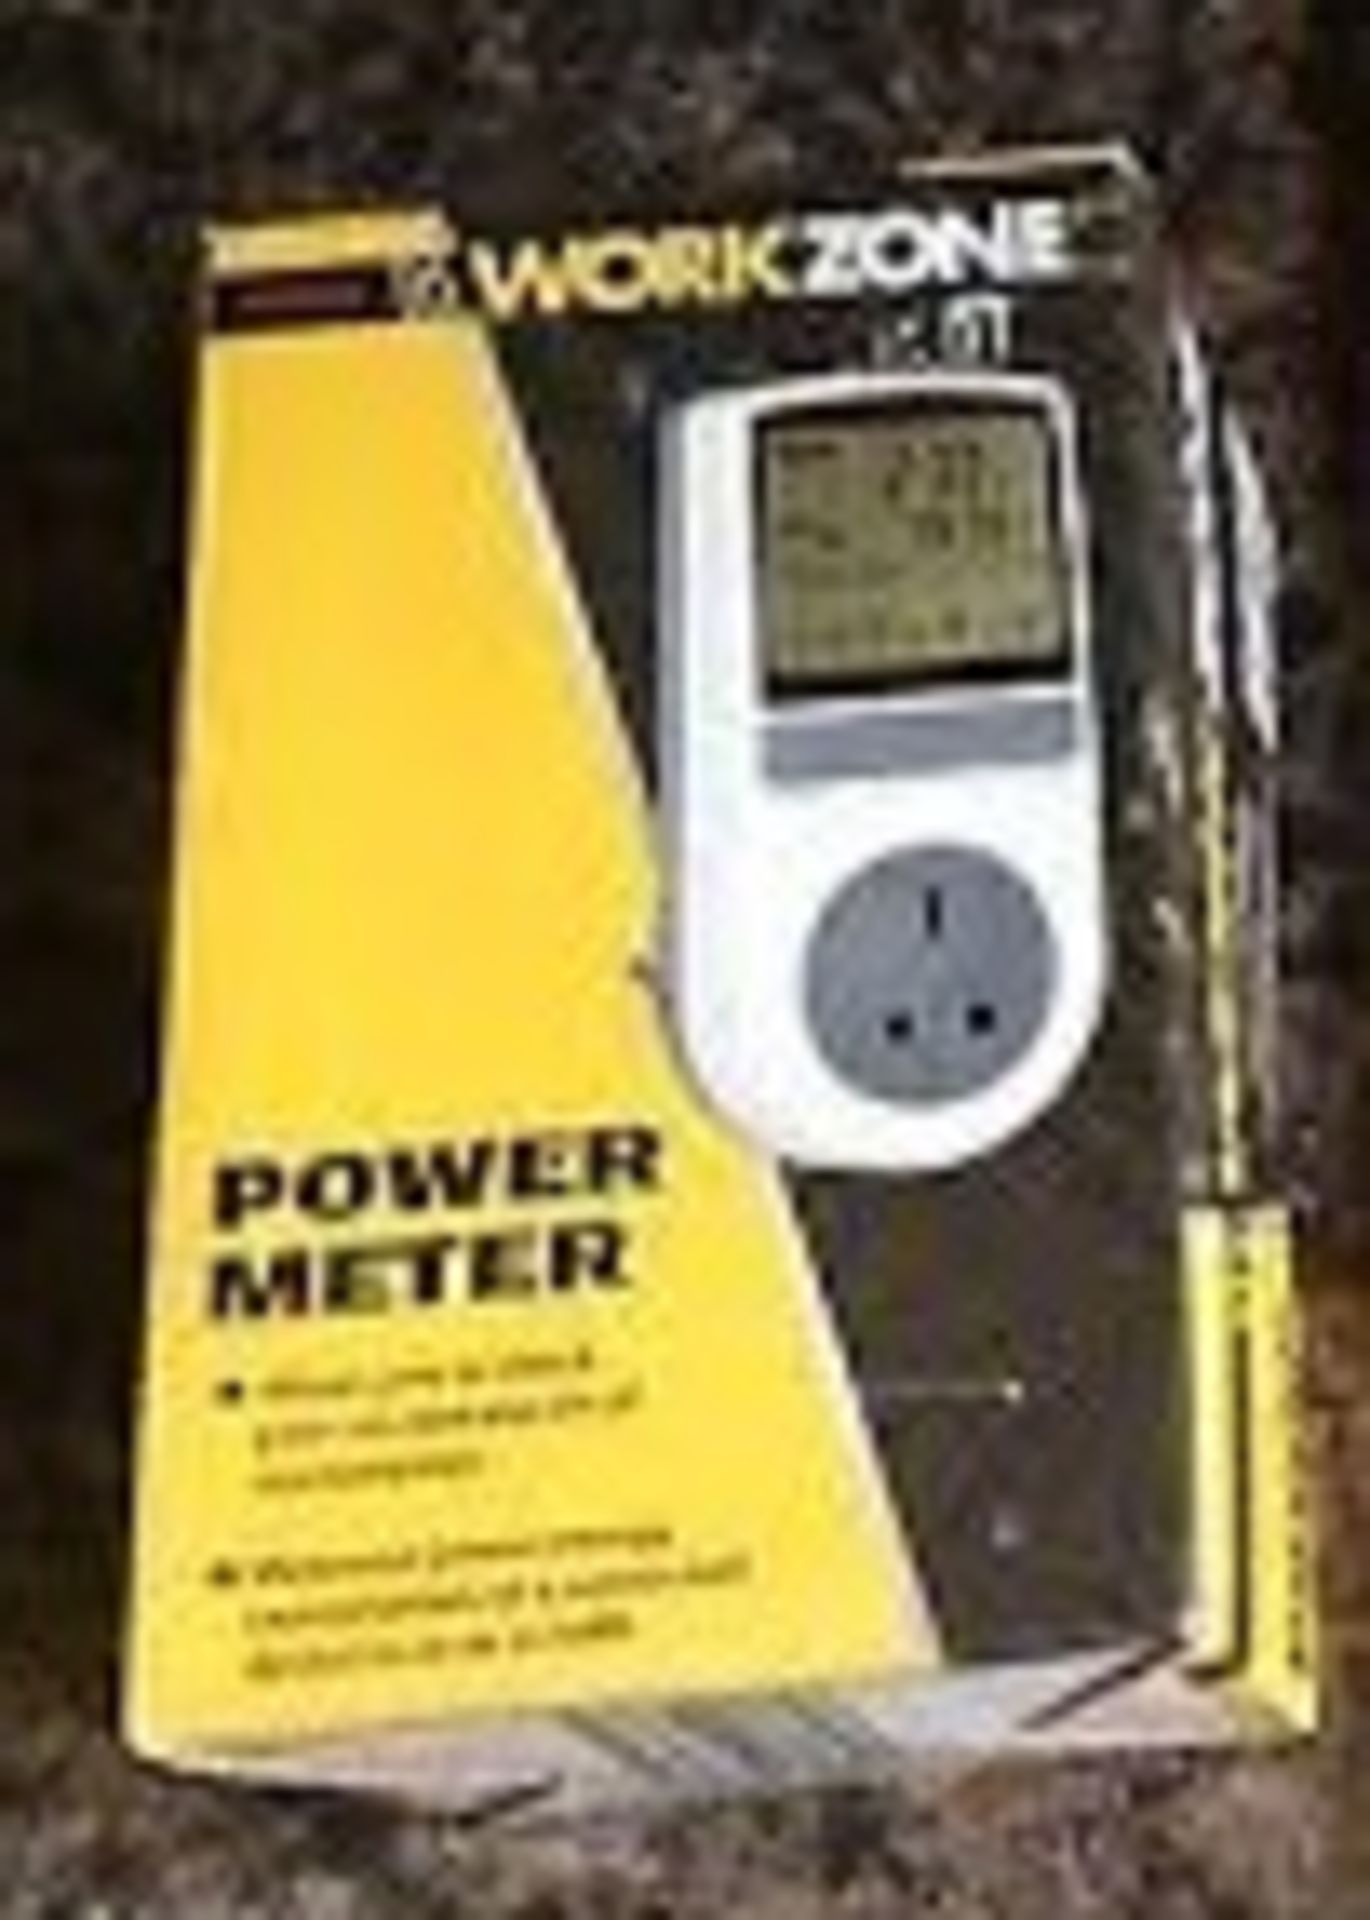 V Brand New Work Zone Display Energy Consumption-Display History Consumption Power Meter X 2 YOUR